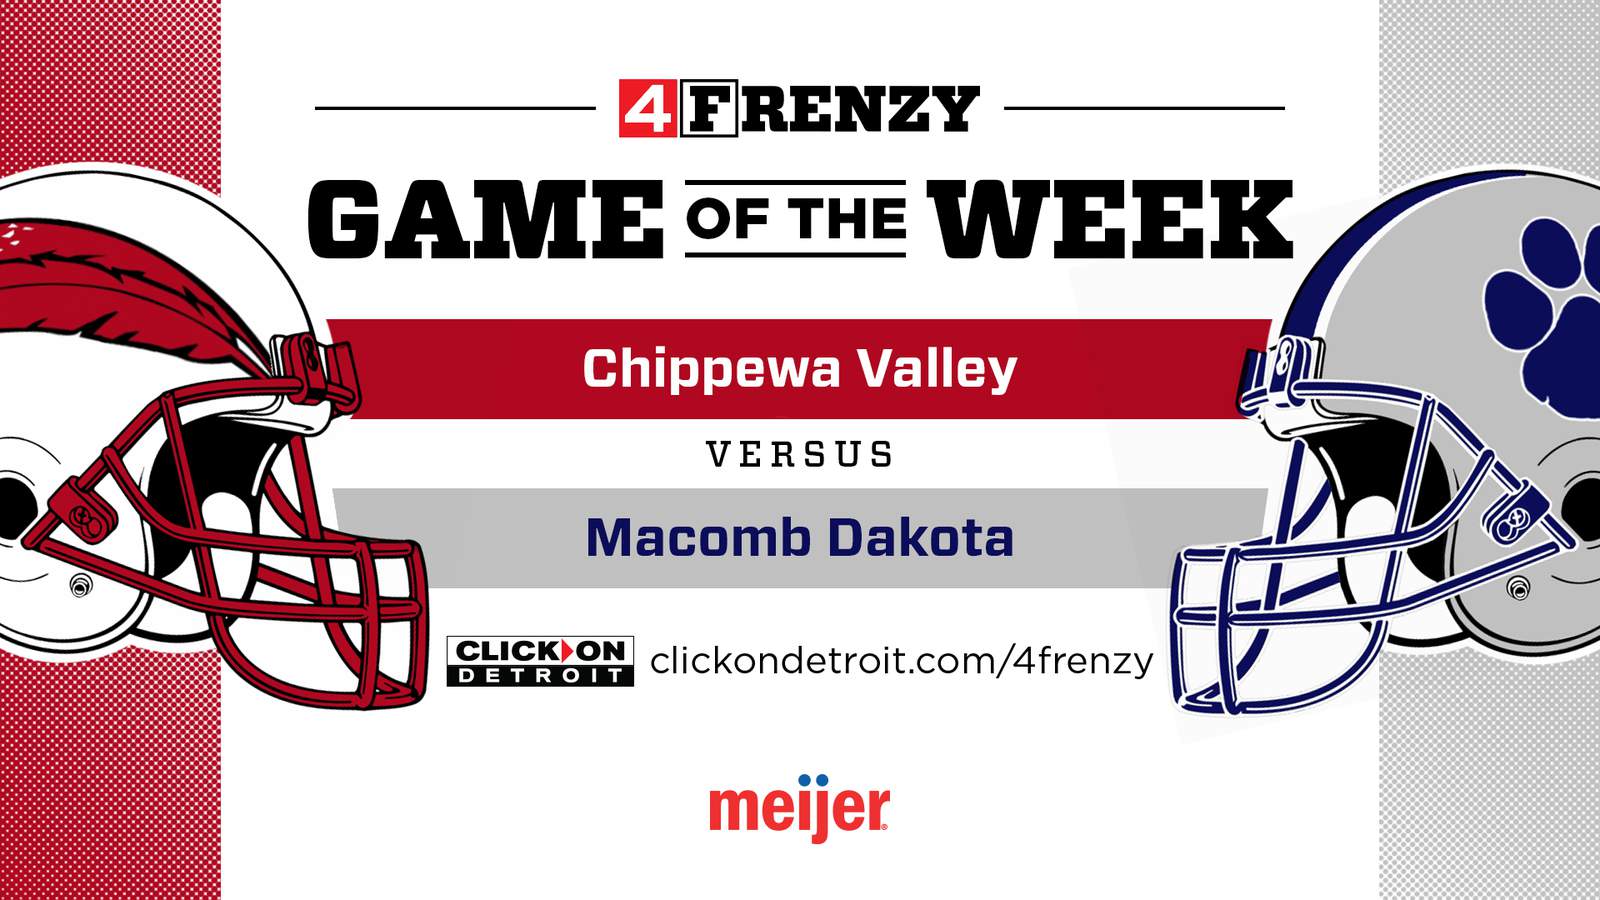 4Frenzy Game of the Week highlights